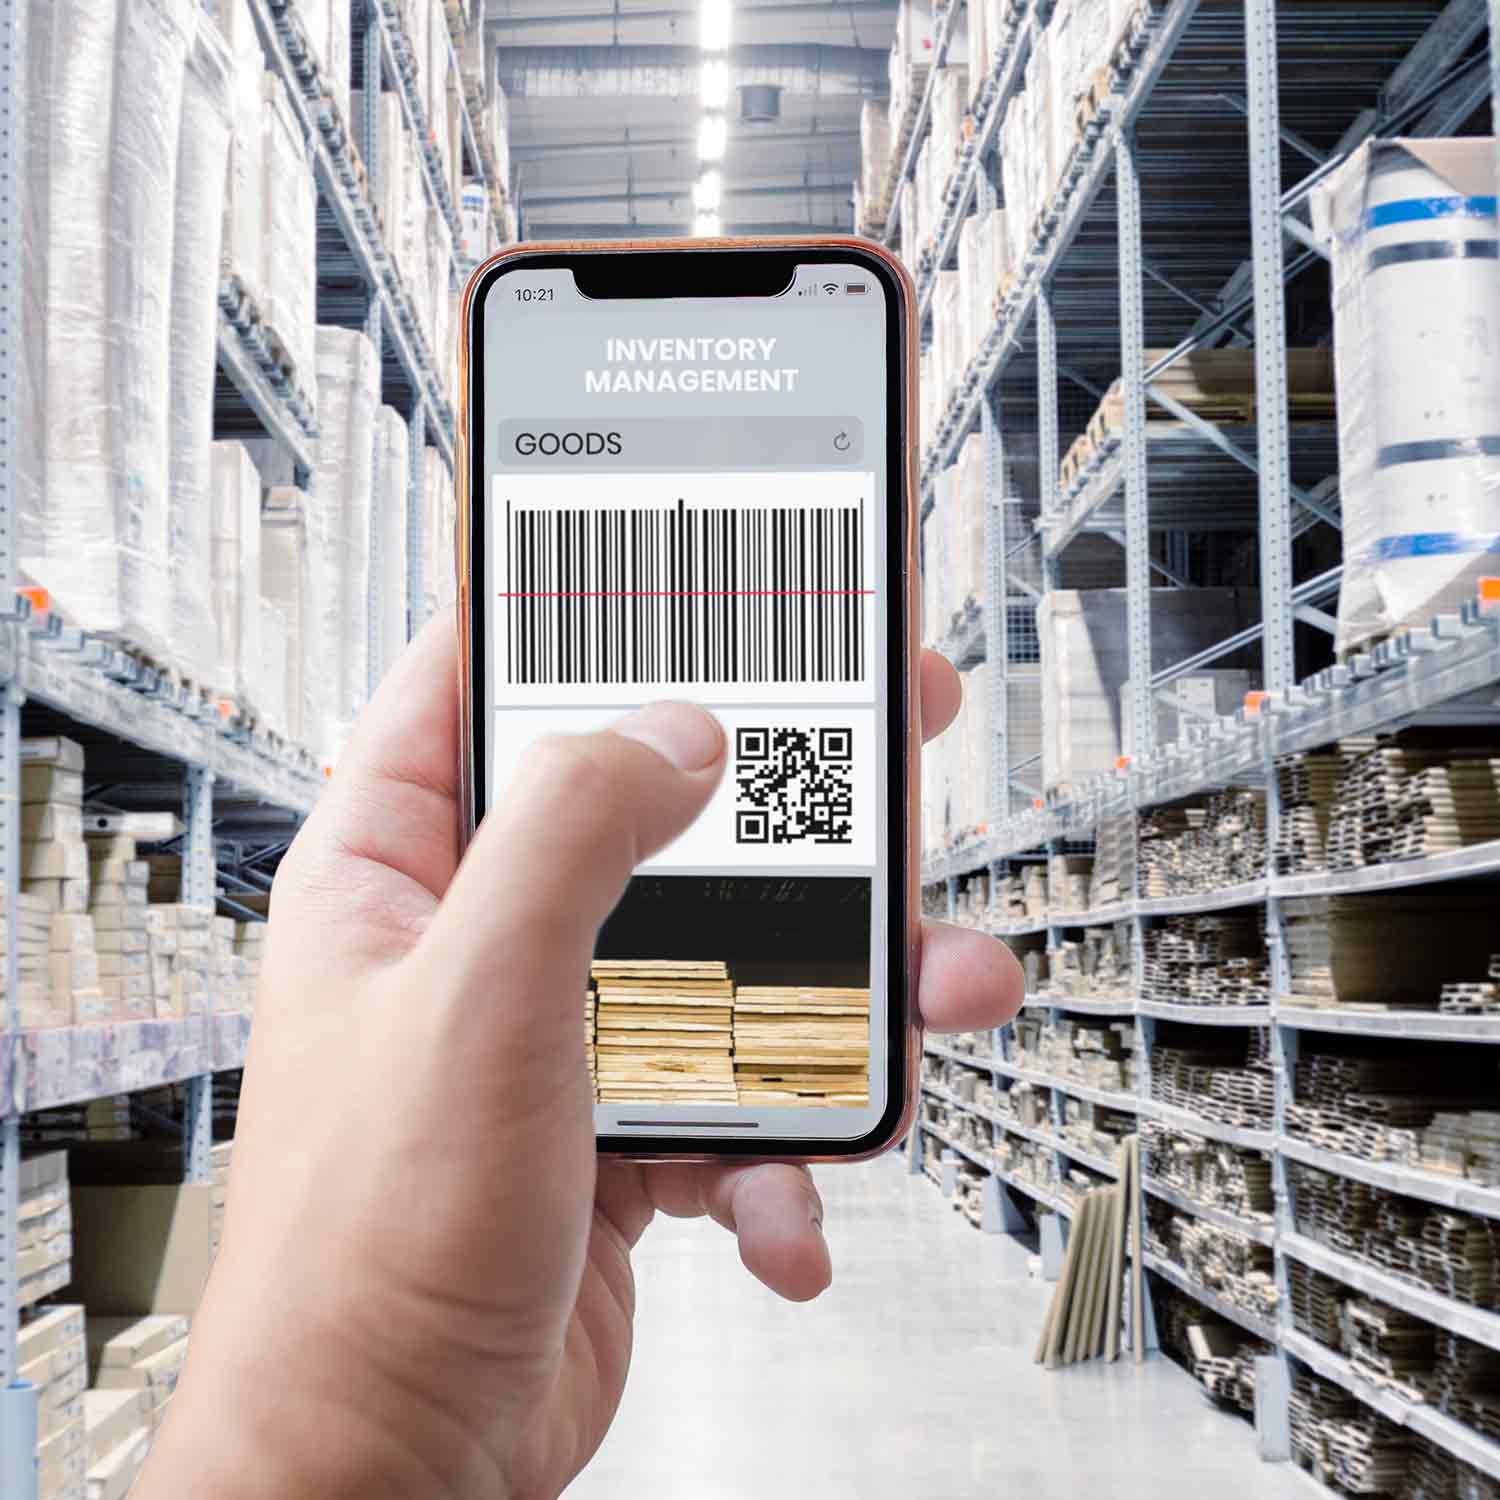 Mobile phone scans codes in a warehouse